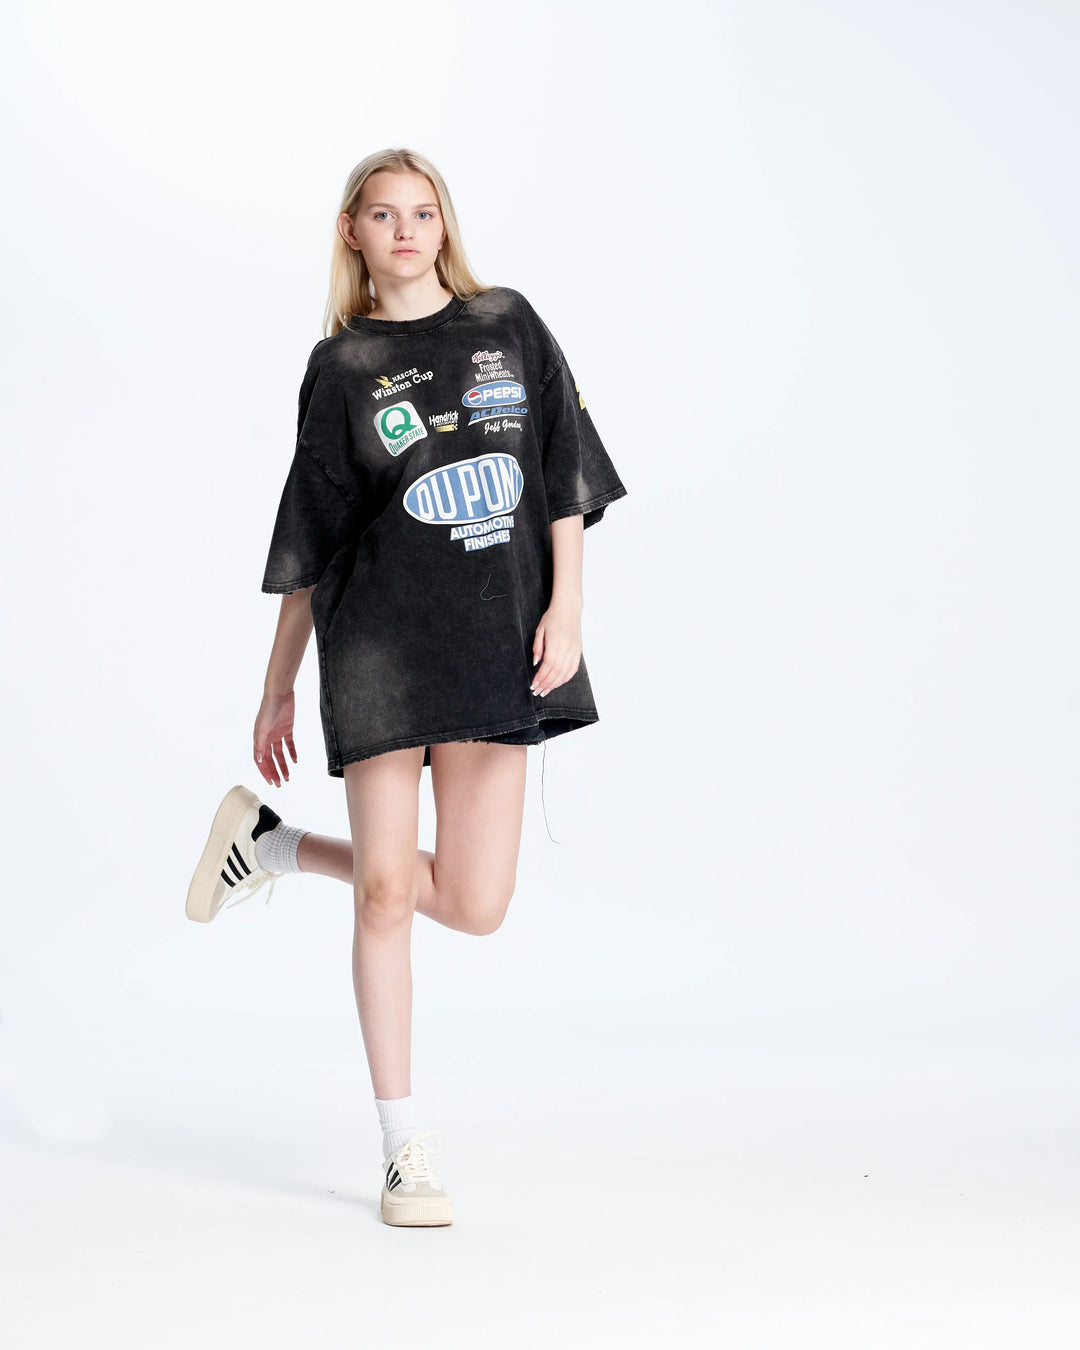 An image of a   83559 Oversized Tee by  Mirra Masa